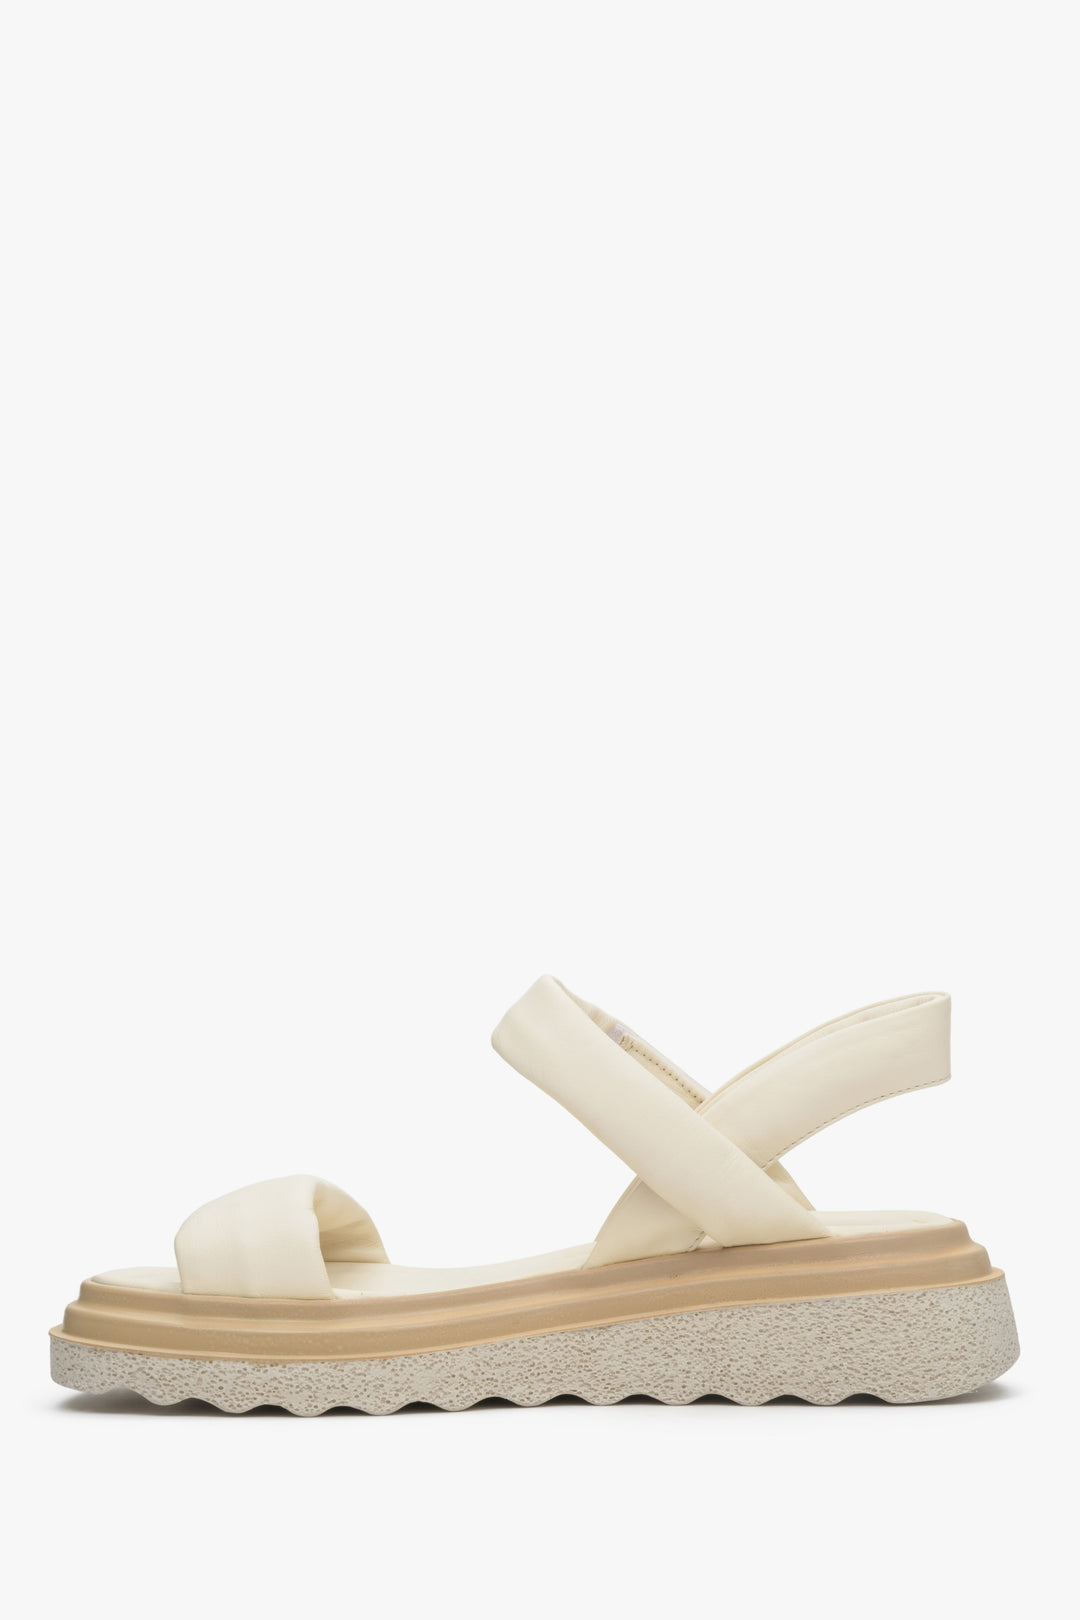 Women's light beige sandals on a flexible chunky platform made of natural leather - profile.